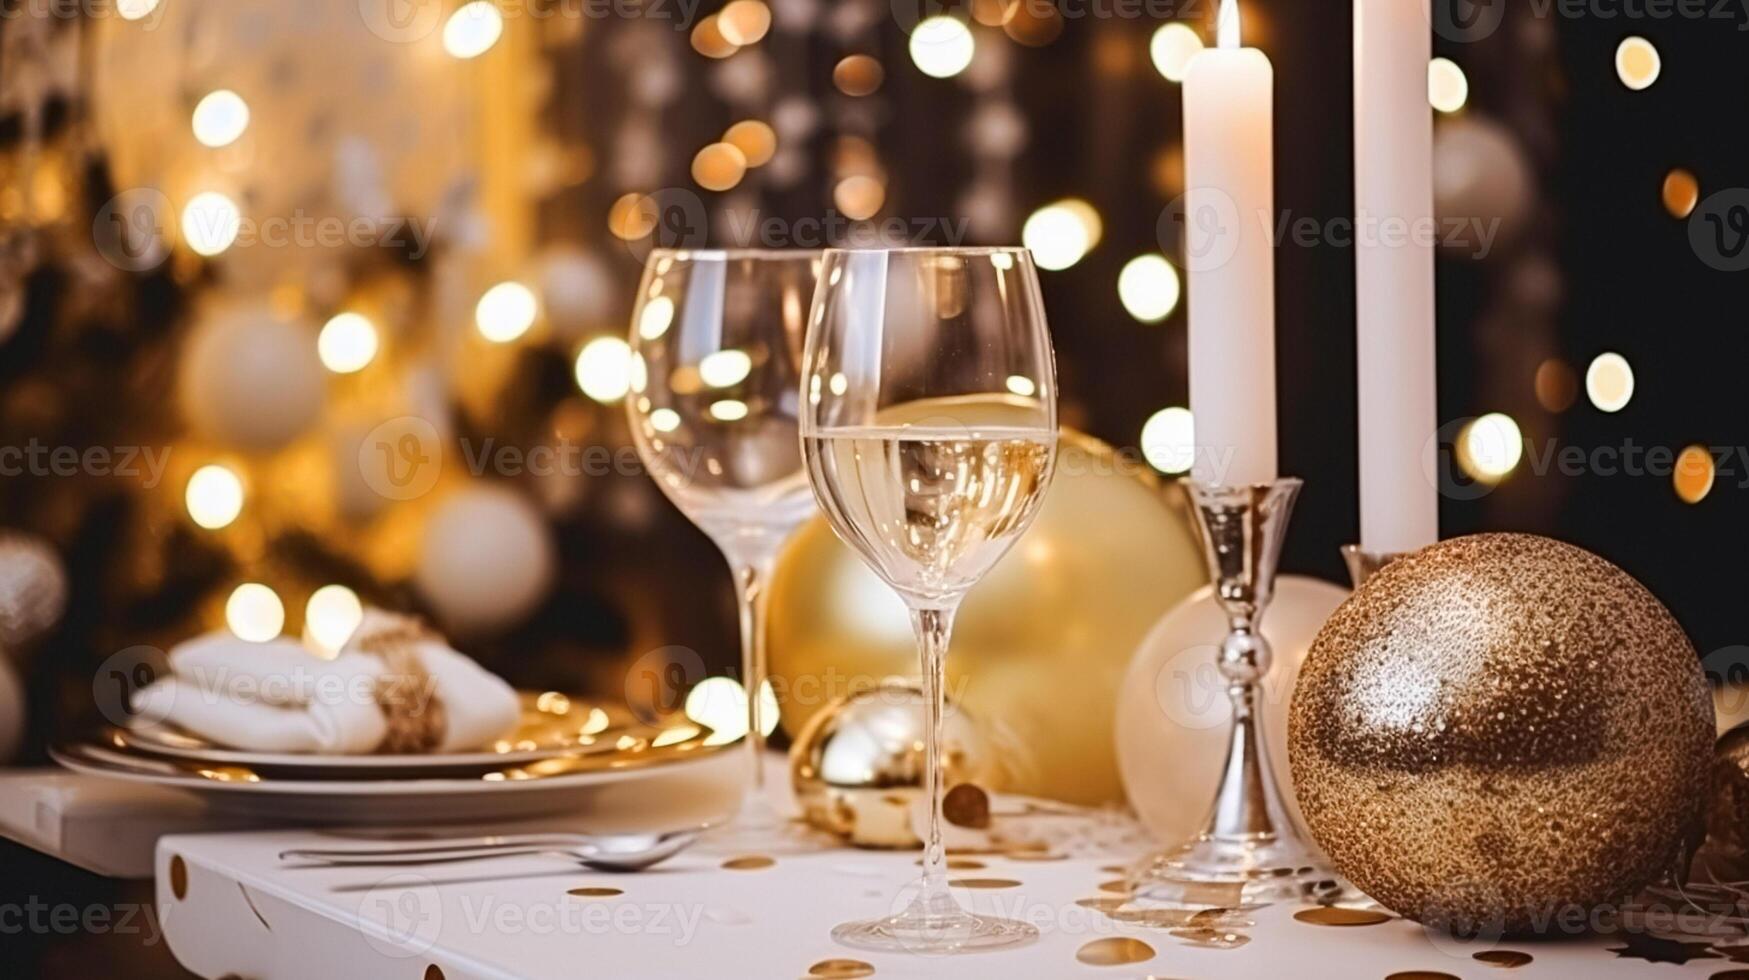 New Year party decor, home decoration for festive holiday celebration photo